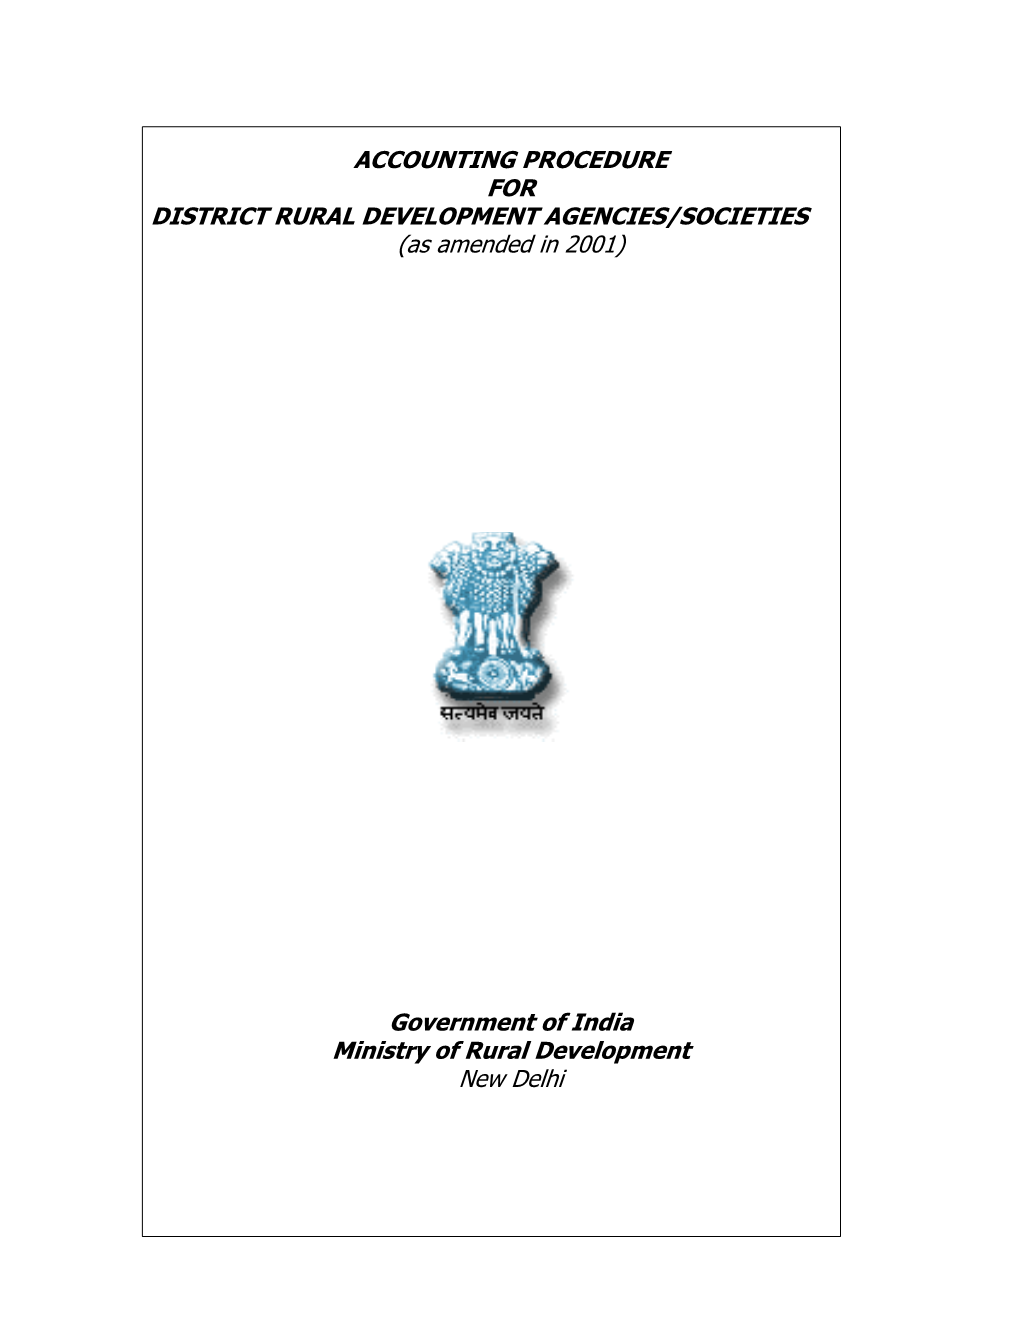 ACCOUNTING PROCEDURE for DISTRICT RURAL DEVELOPMENT AGENCIES/SOCIETIES (As Amended in 2001)